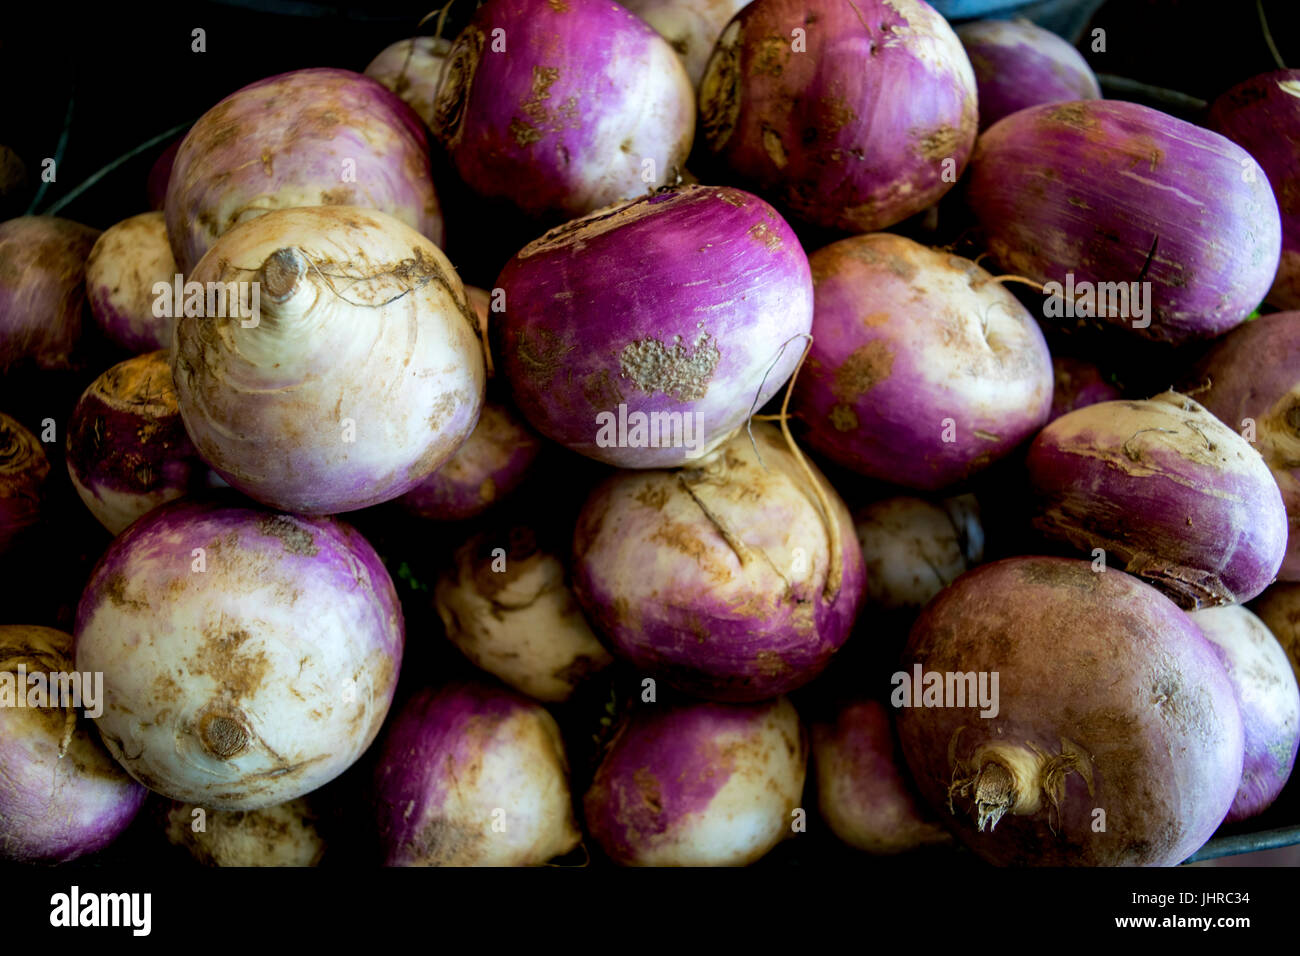 Fresh, colorful turnips at the farmers market. Stock Photo